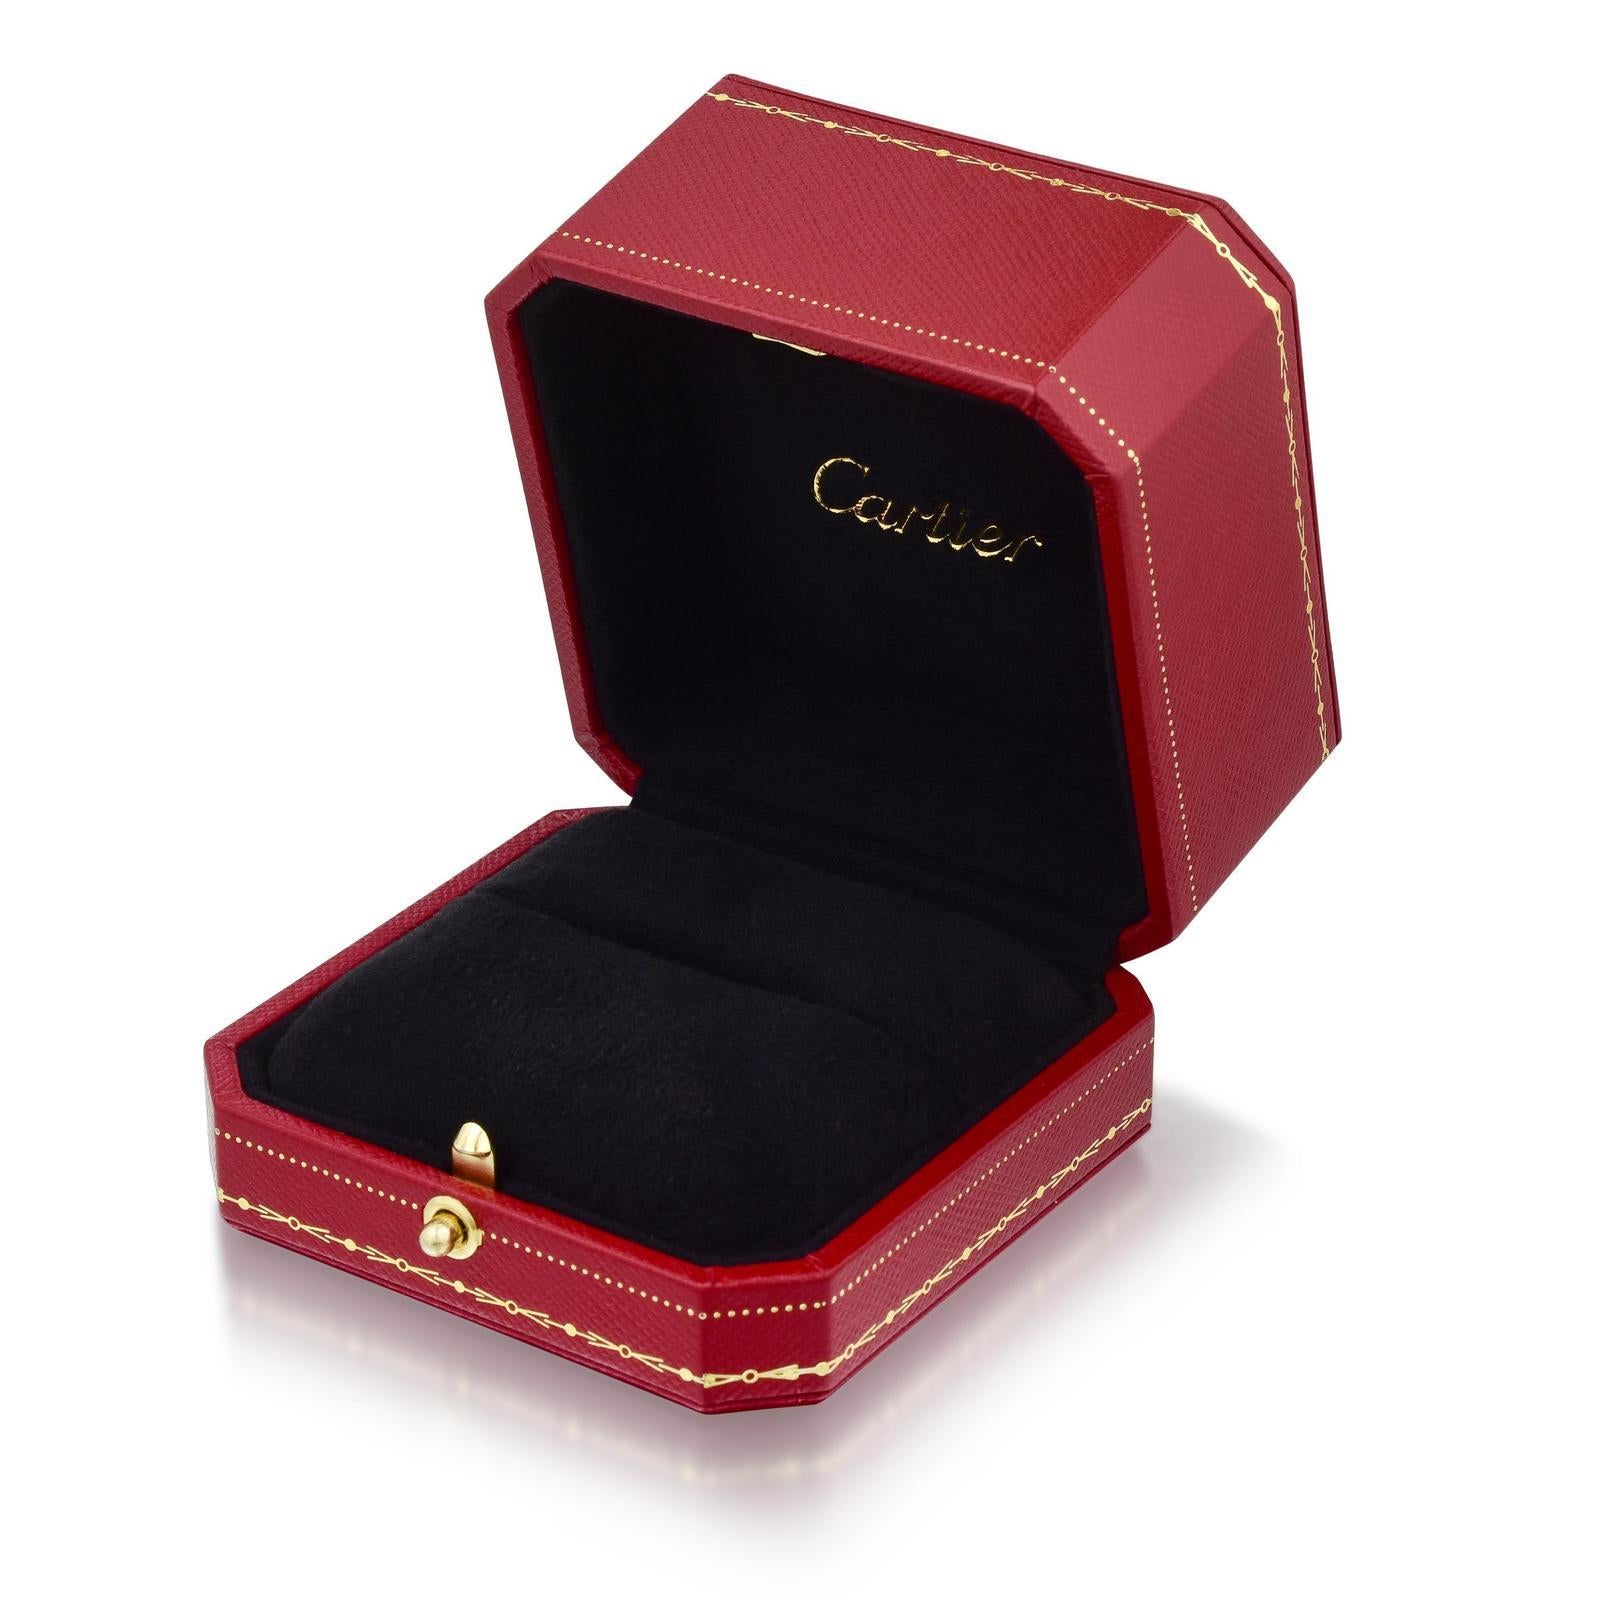 A spectacular ring. One of the most recognizable designs from Cartier. 
This 5 row Panthere ring is truly something gorgeous you will be happy to wear. 

This collection is named after the Panthere jewels, Cartier's icon.

Maillon Panthere ring 
18K